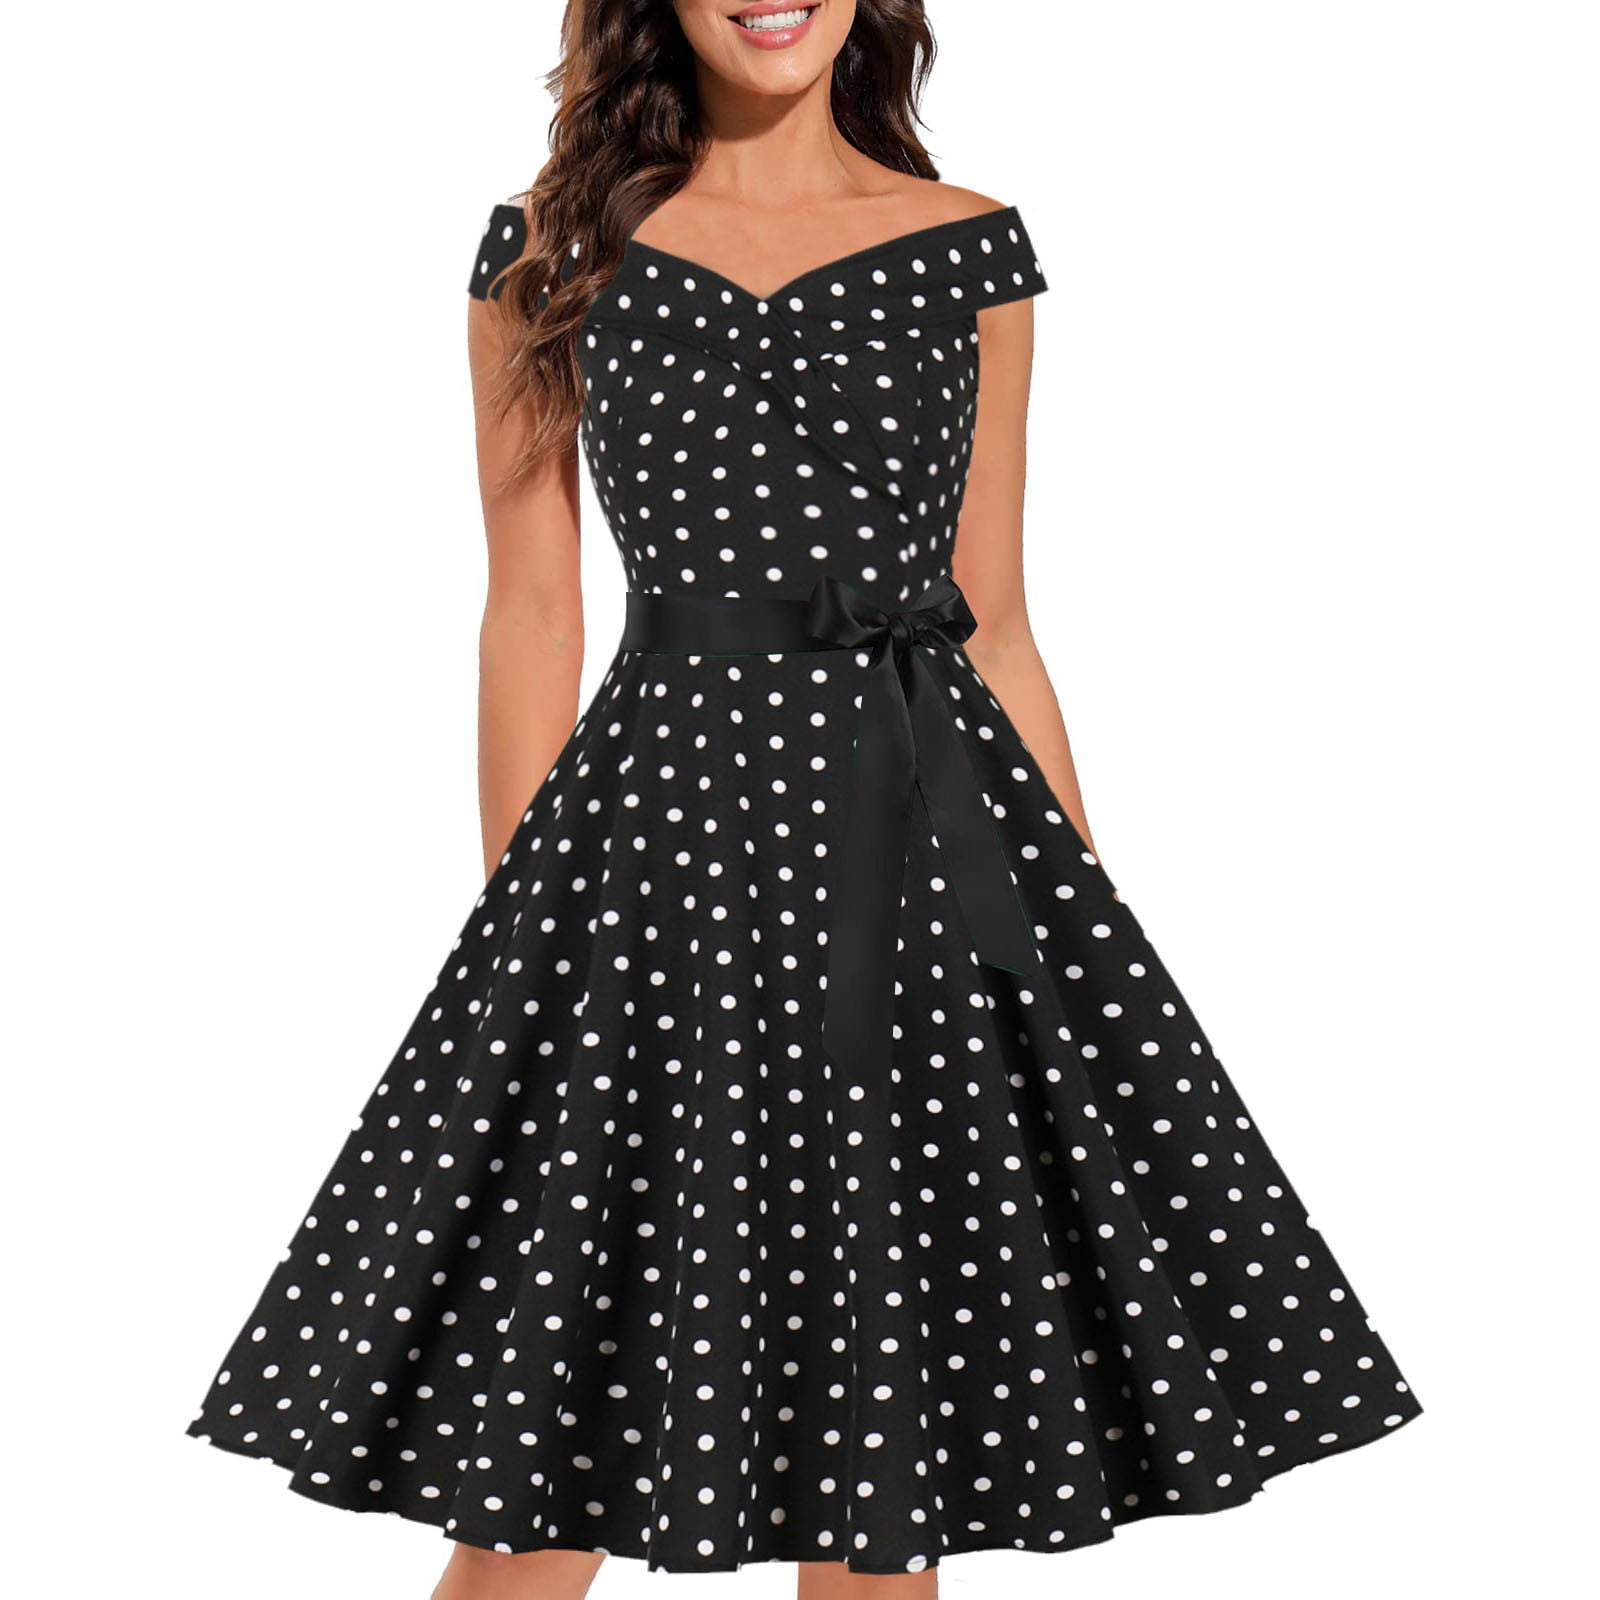 Women's Vintage Dresses, 1950s Retro Fit and Flare Party Dress, 20s 30s  Short Sleeve Cocktail Swing Dresses - Walmart.com